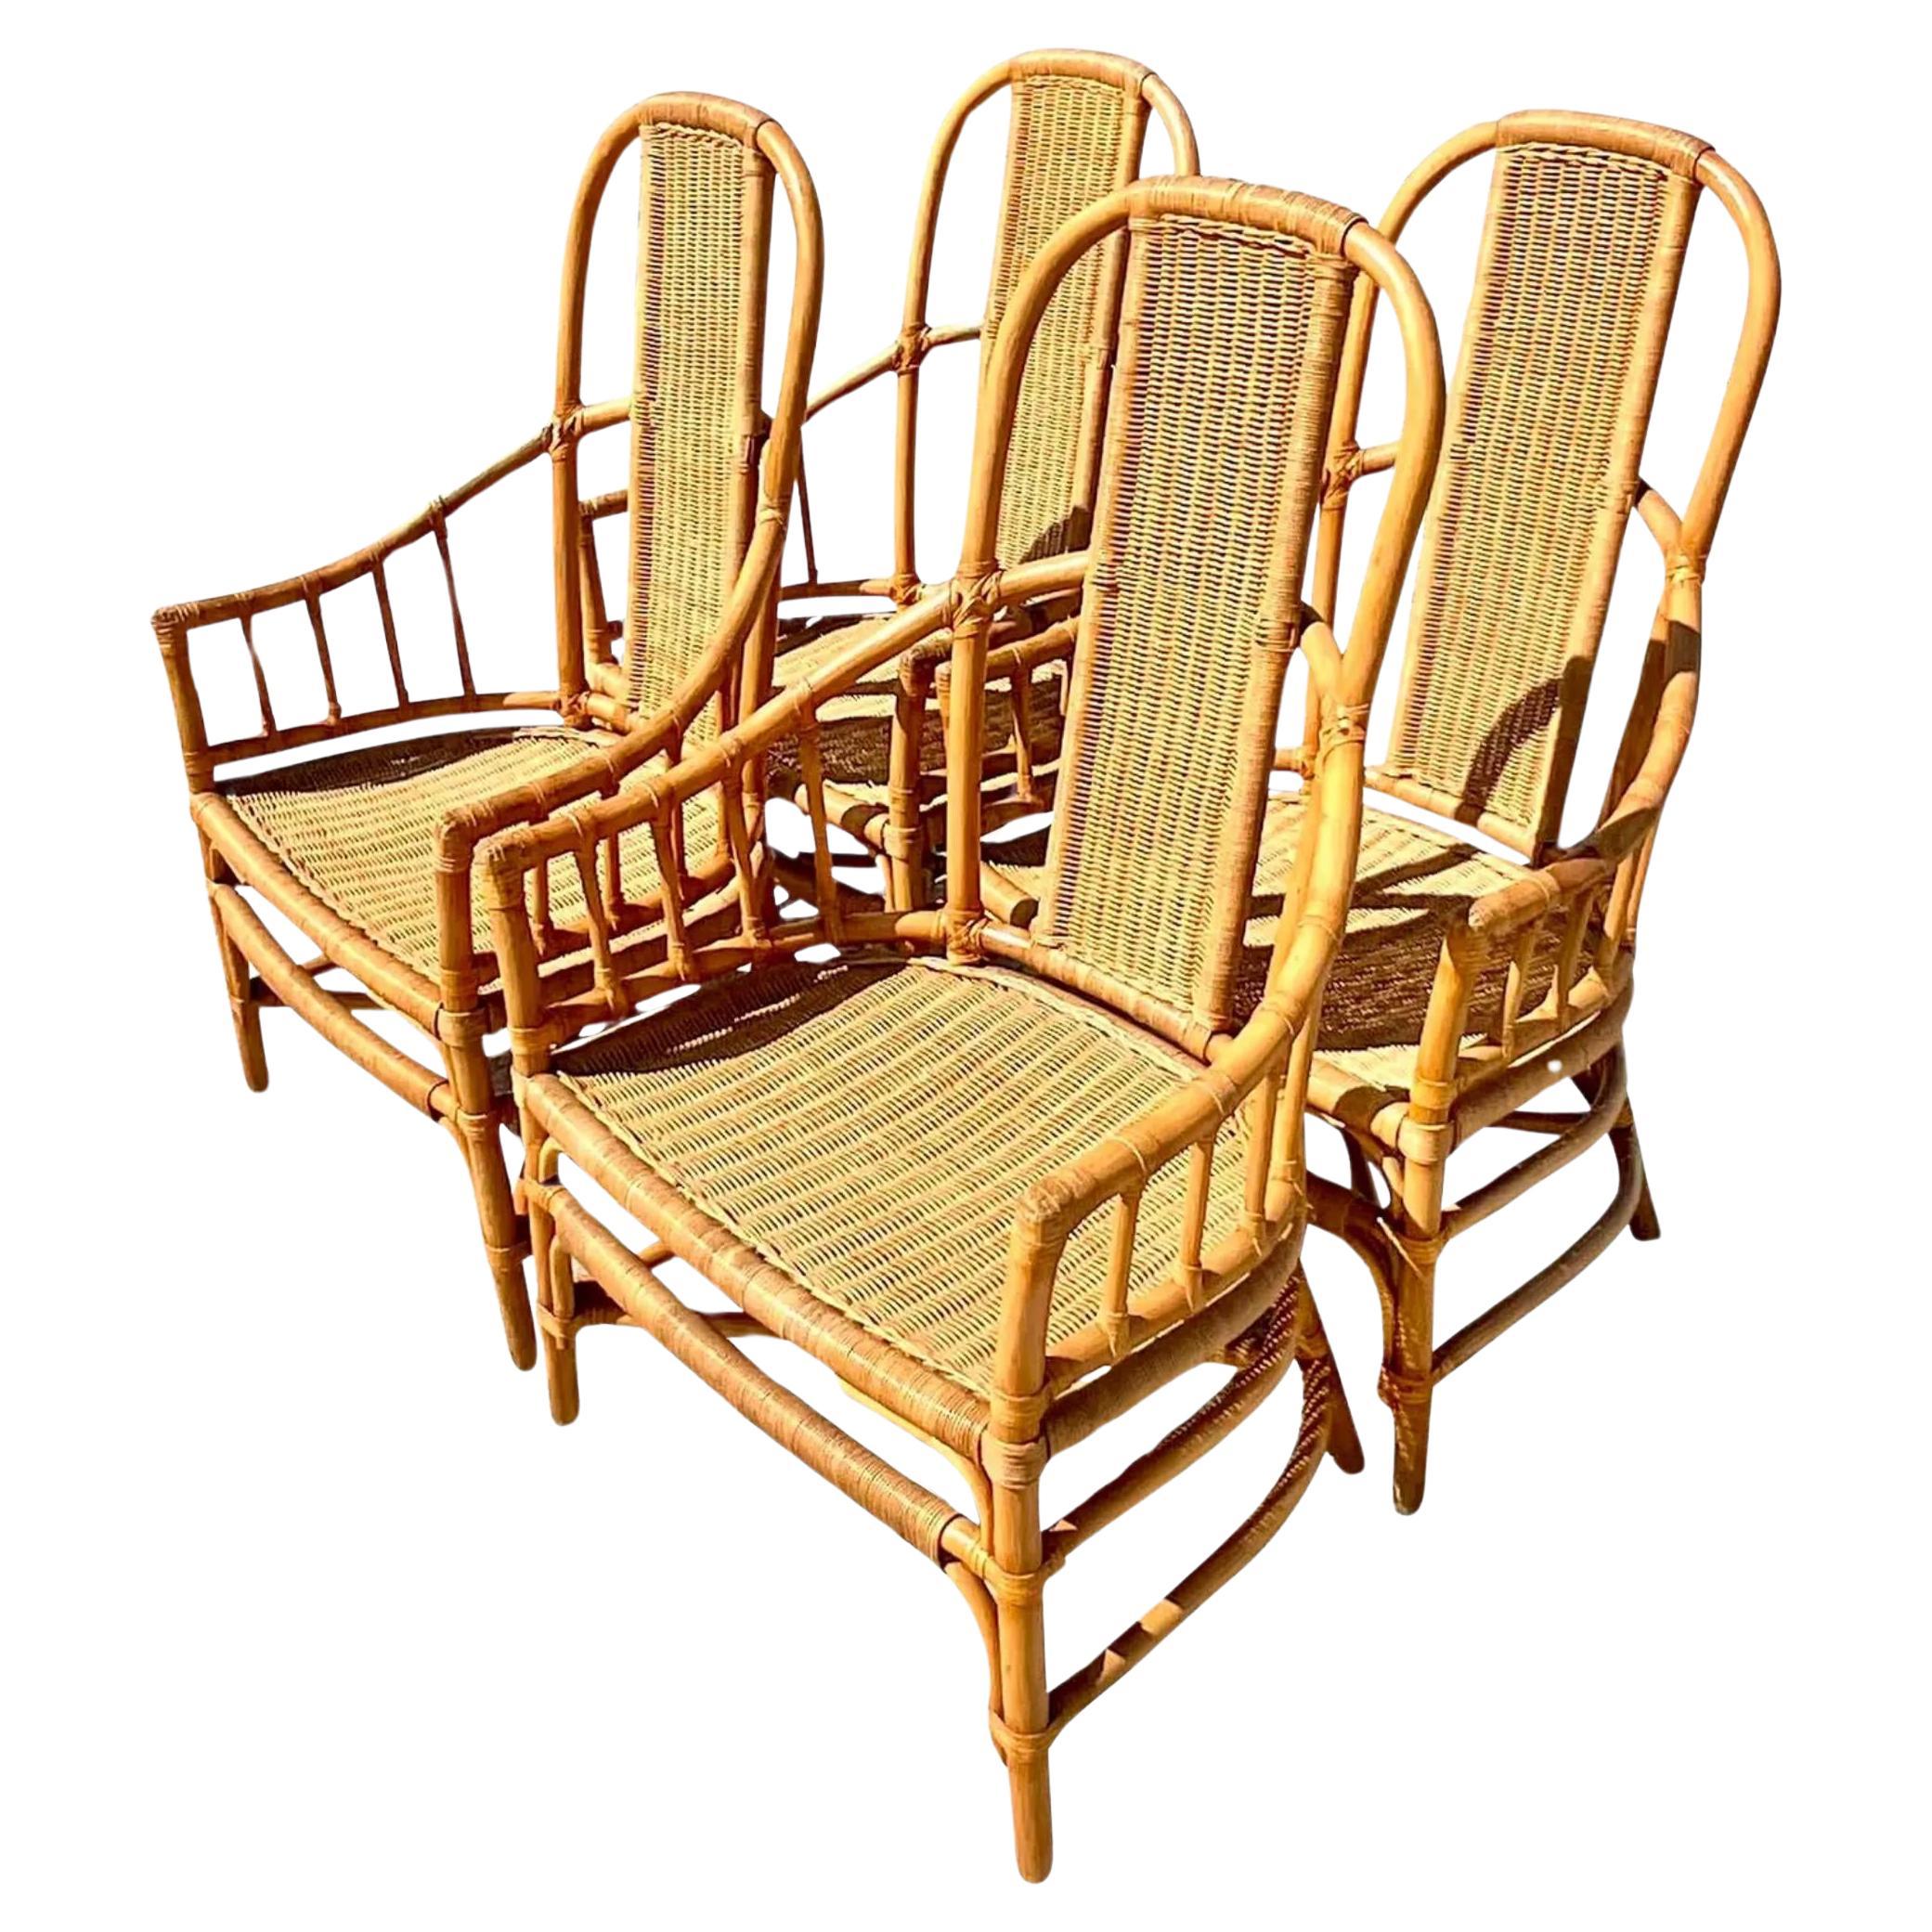 Vintage Coastal Mark David Woven Rattan Dining Chairs - Set of 4 For Sale